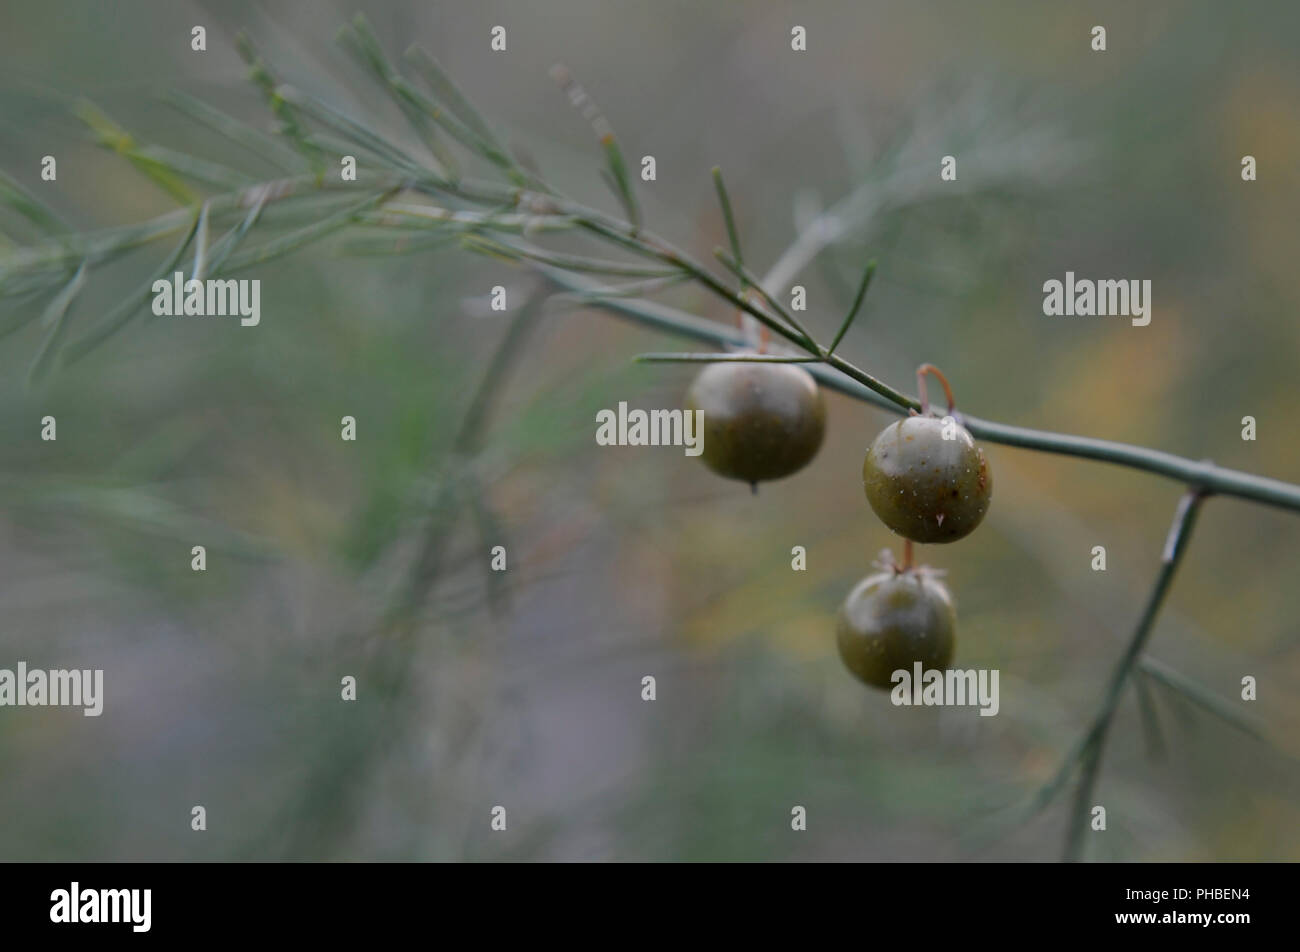 The seeds from an asparagus fern. Stock Photo